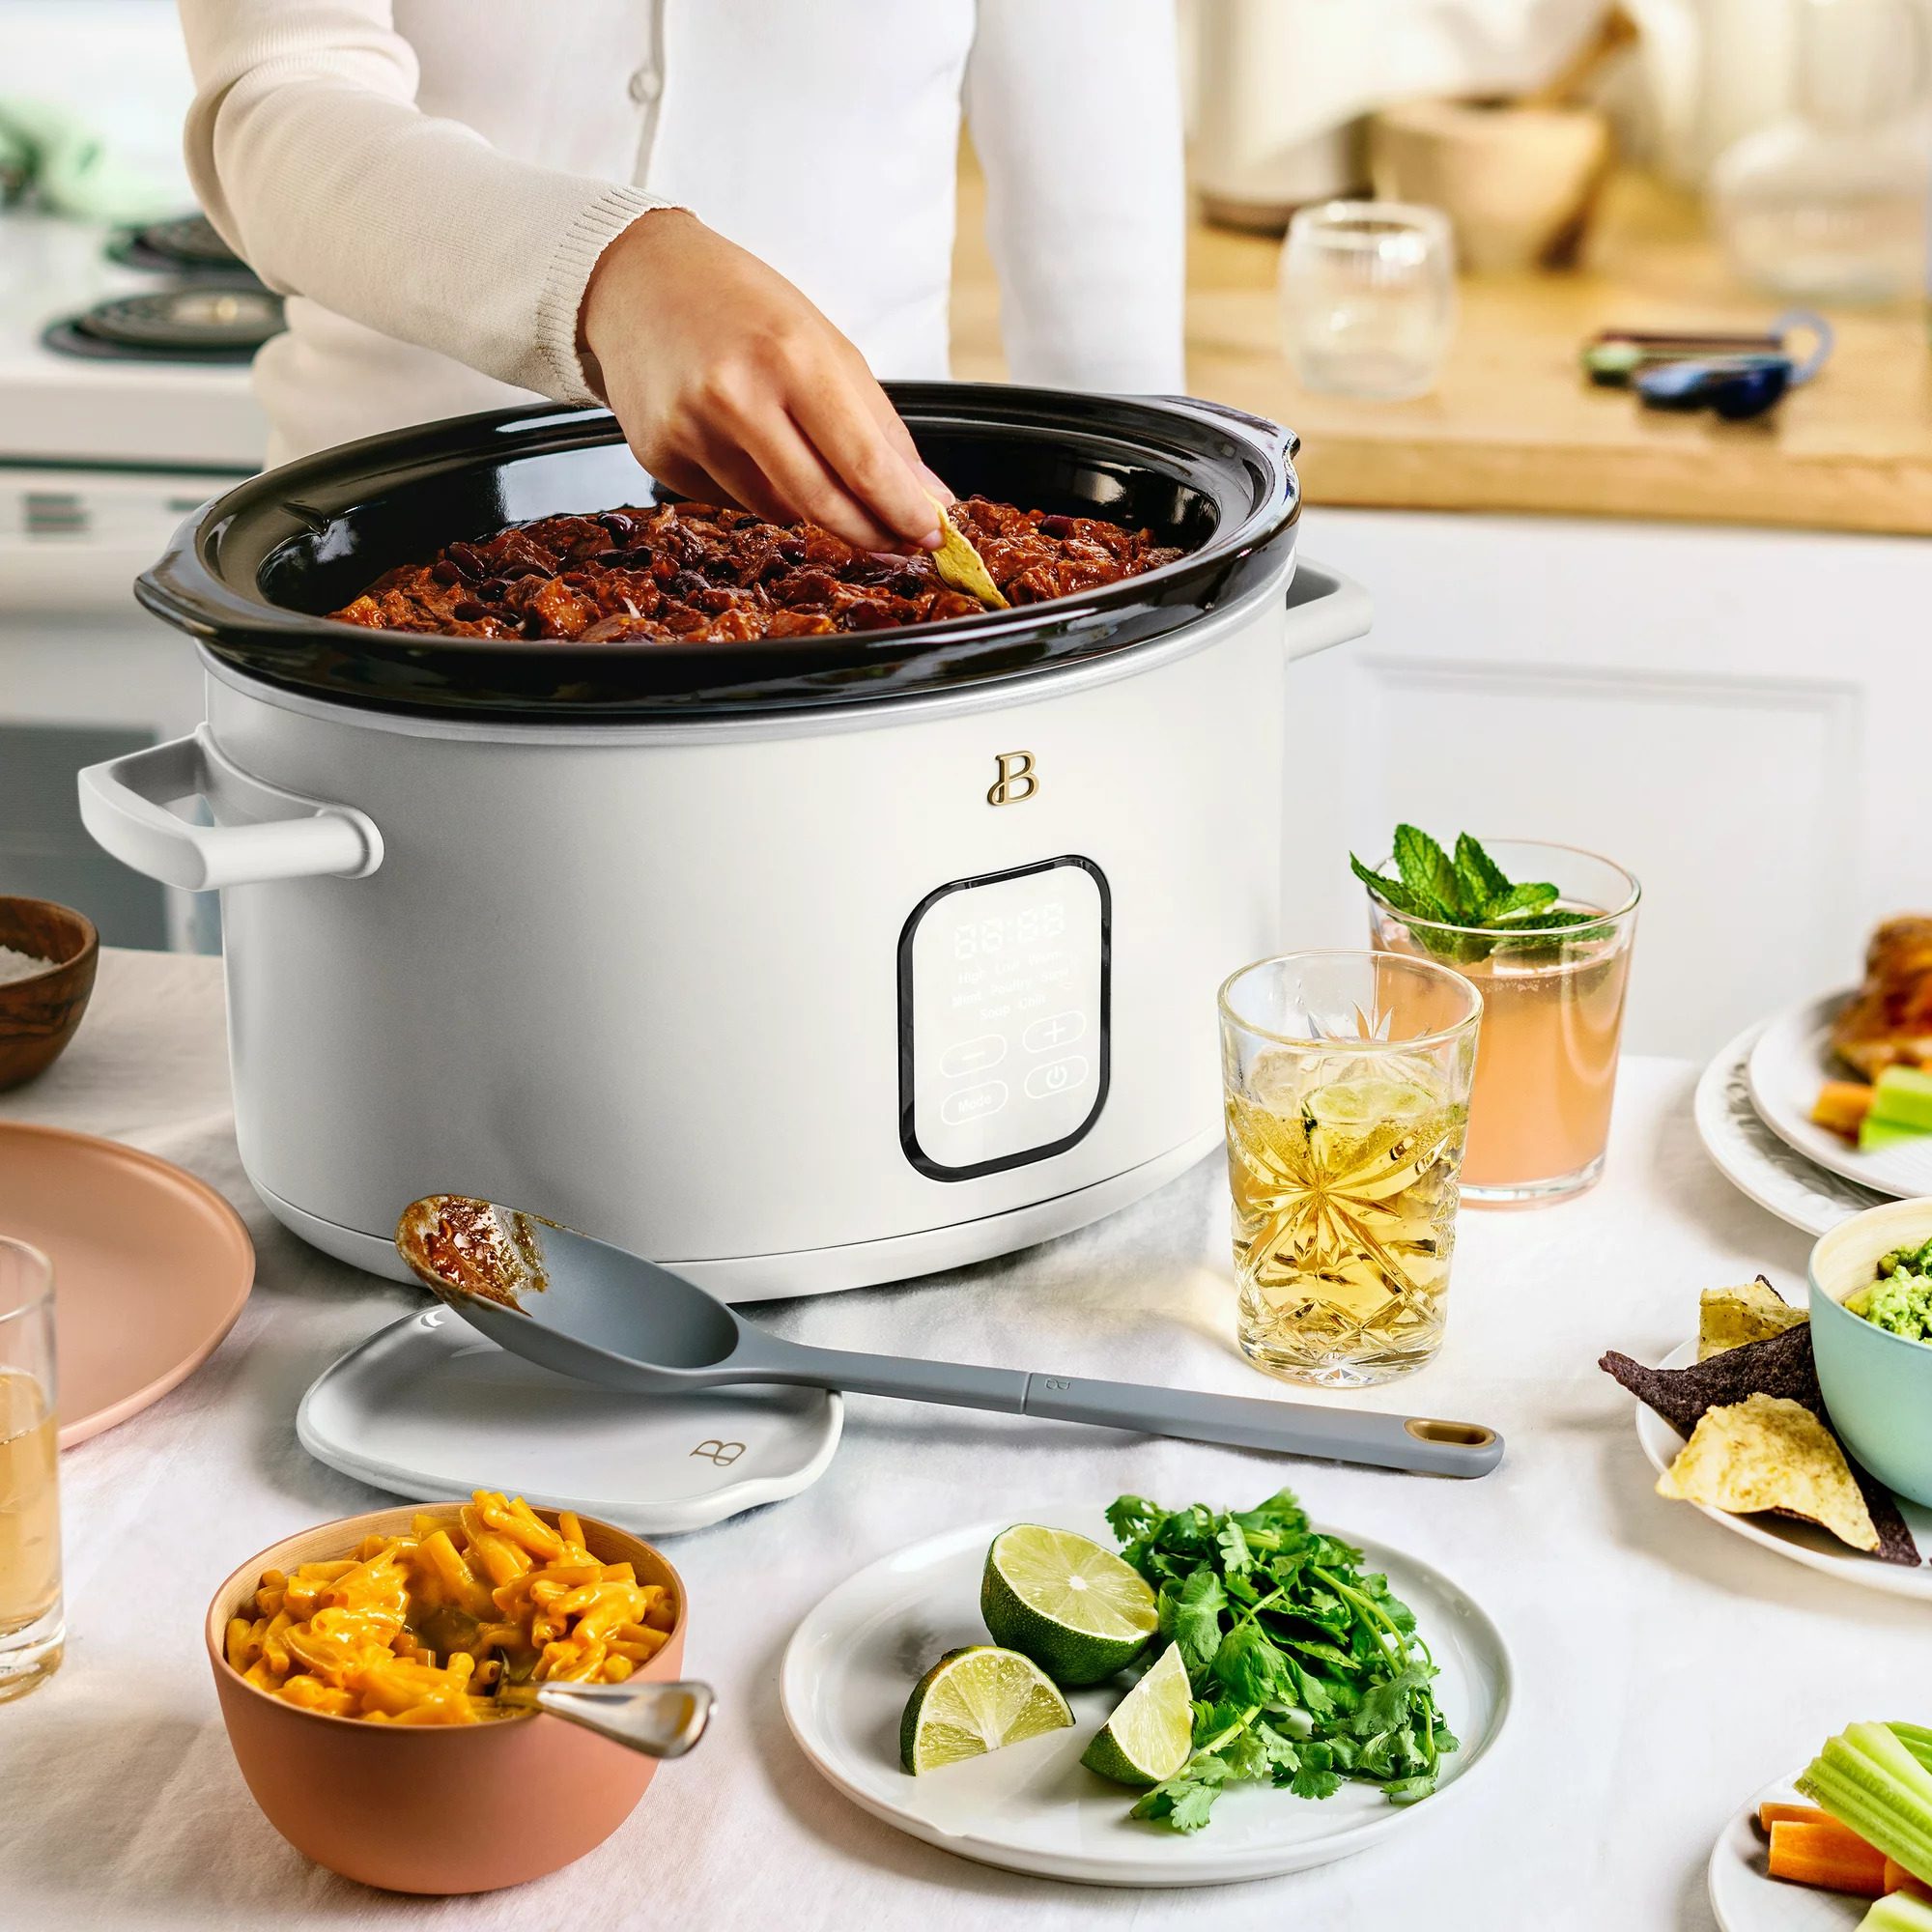 A well-reviewed slow cooker drops to just $30 & more kitchen deals - CNET